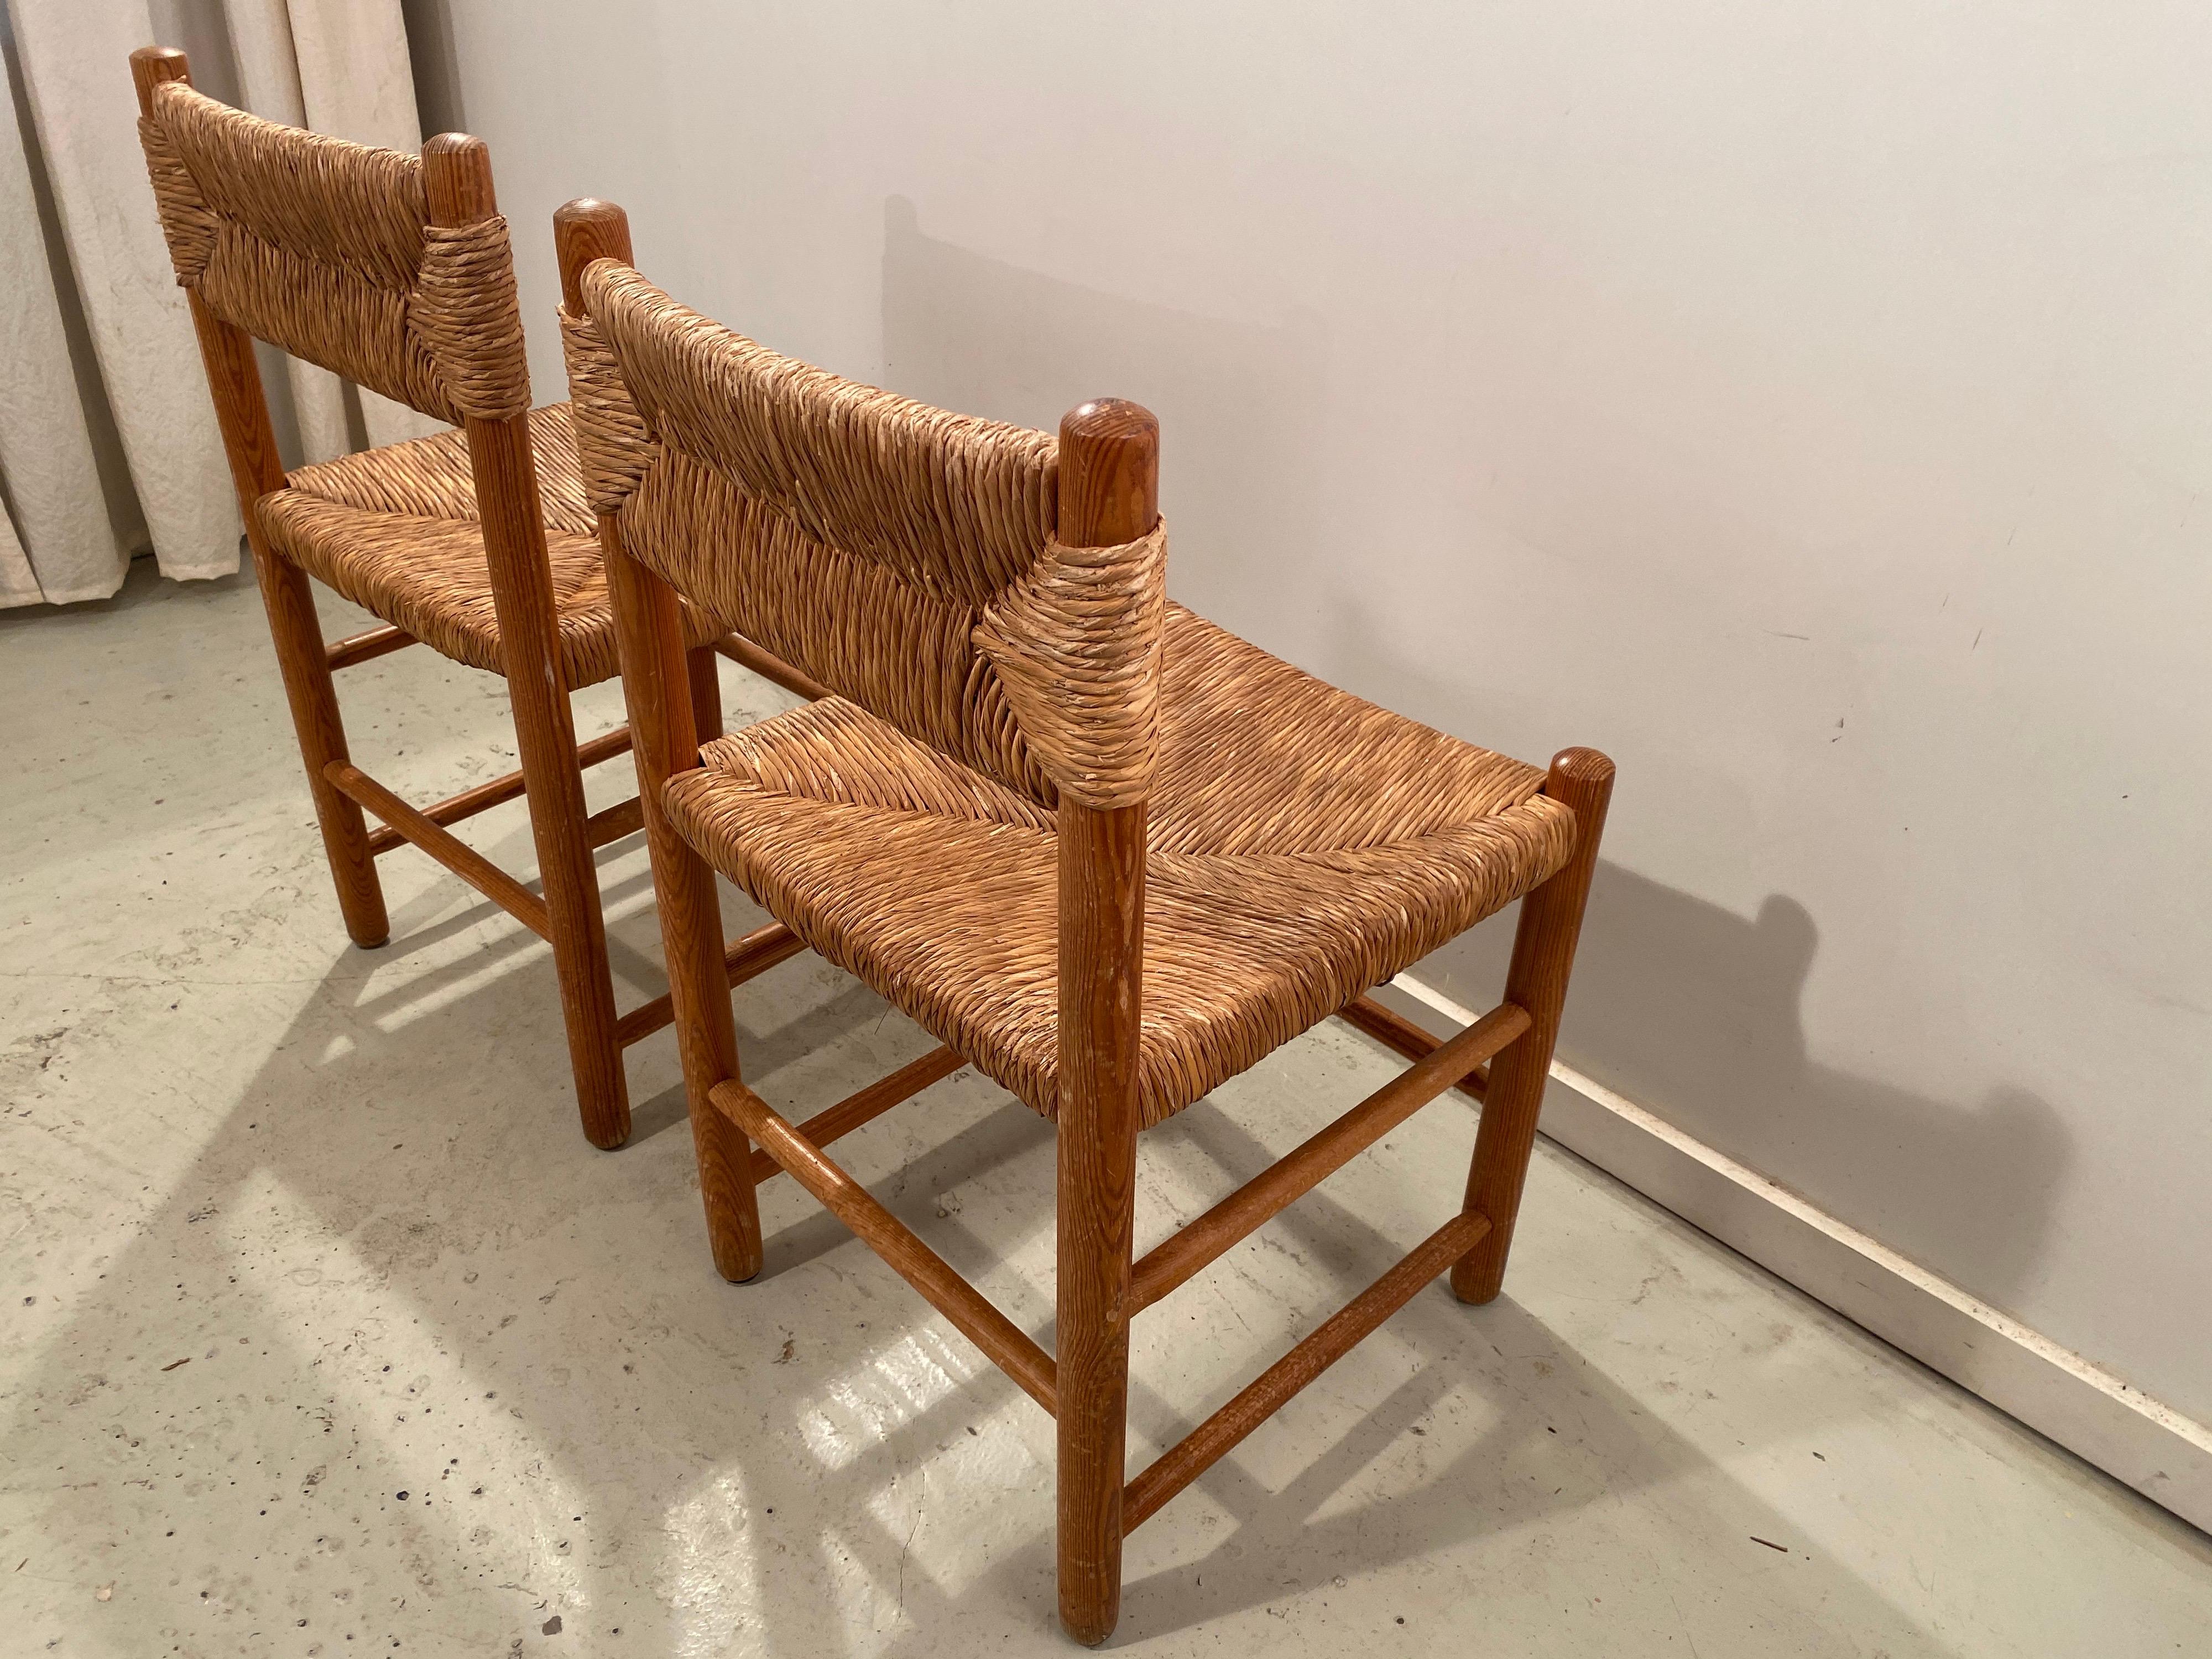 Pair of Wicker Dordogne Chairs by Charlotte Perriand for Sentou, 1950s For Sale 1